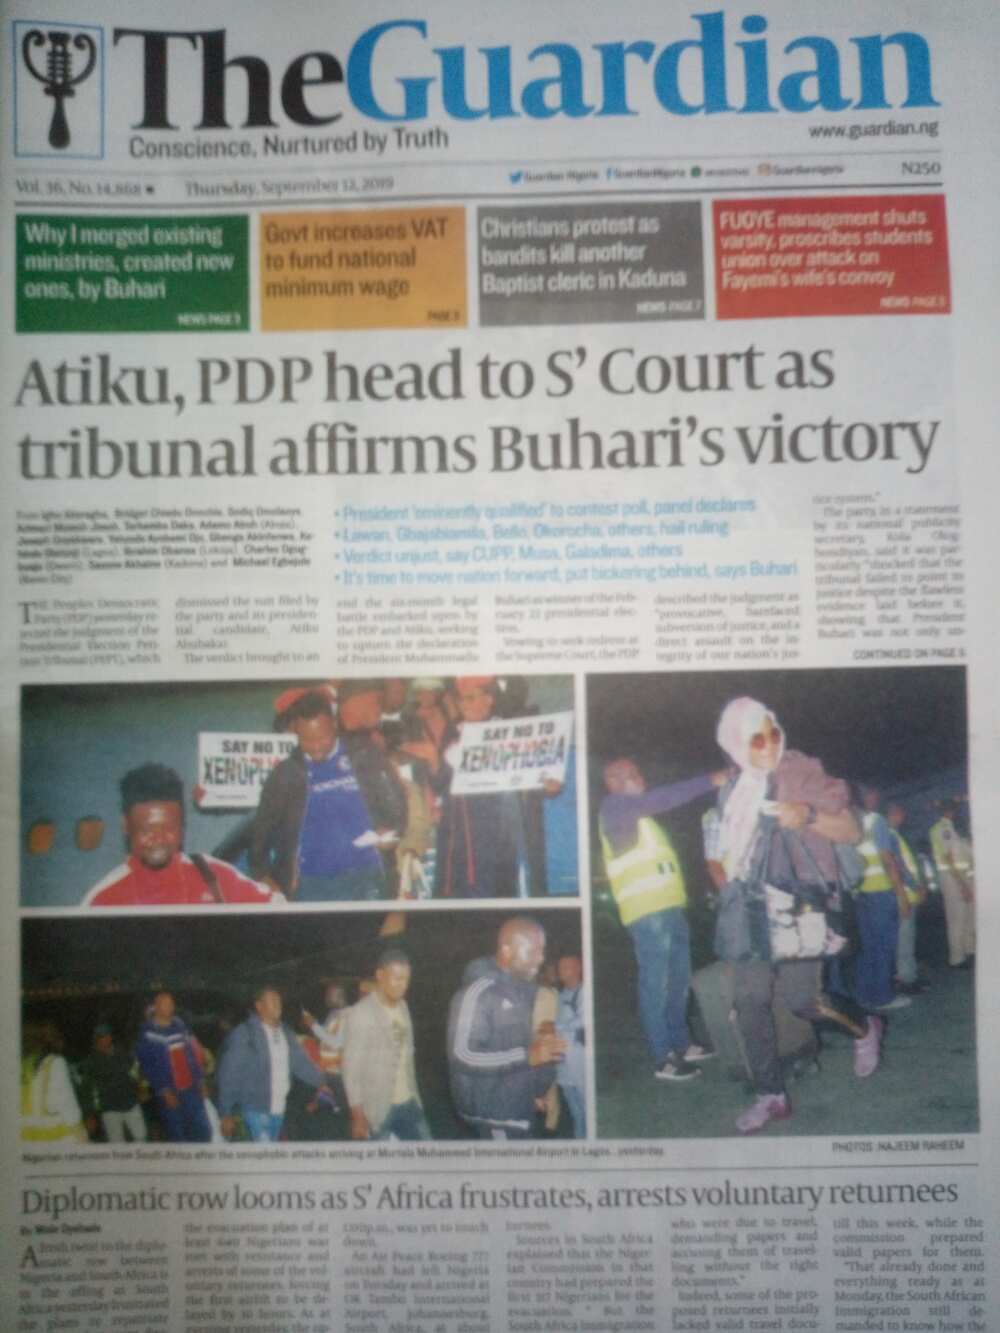 The Guardian newspaper review of September 12